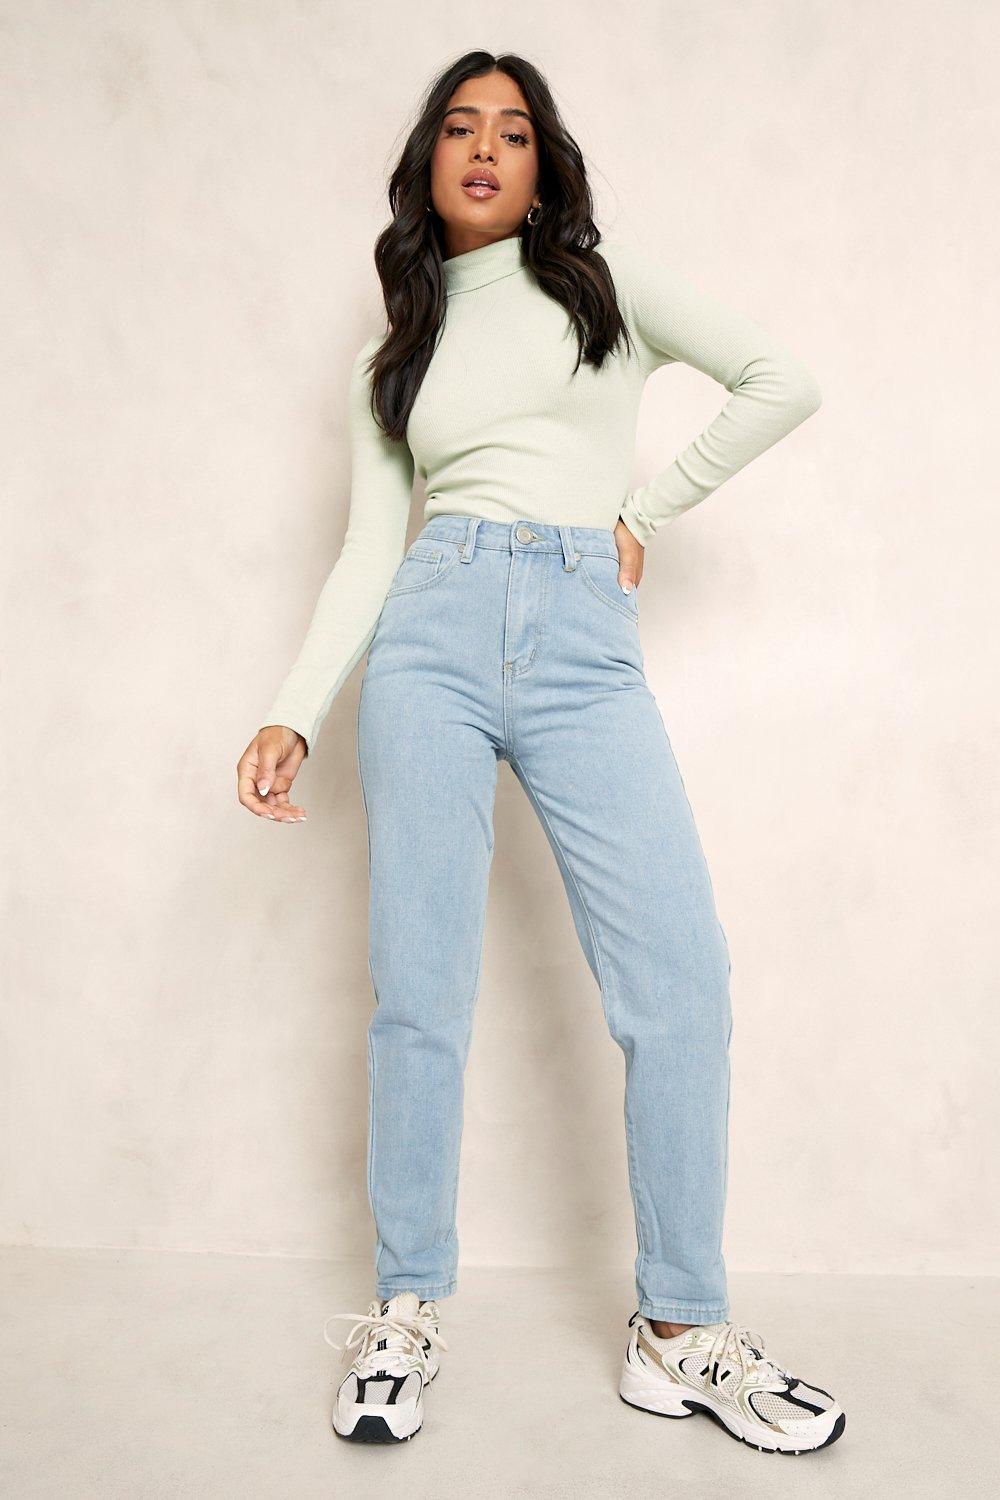 5 Mom Jeans Outfits - Petite Style